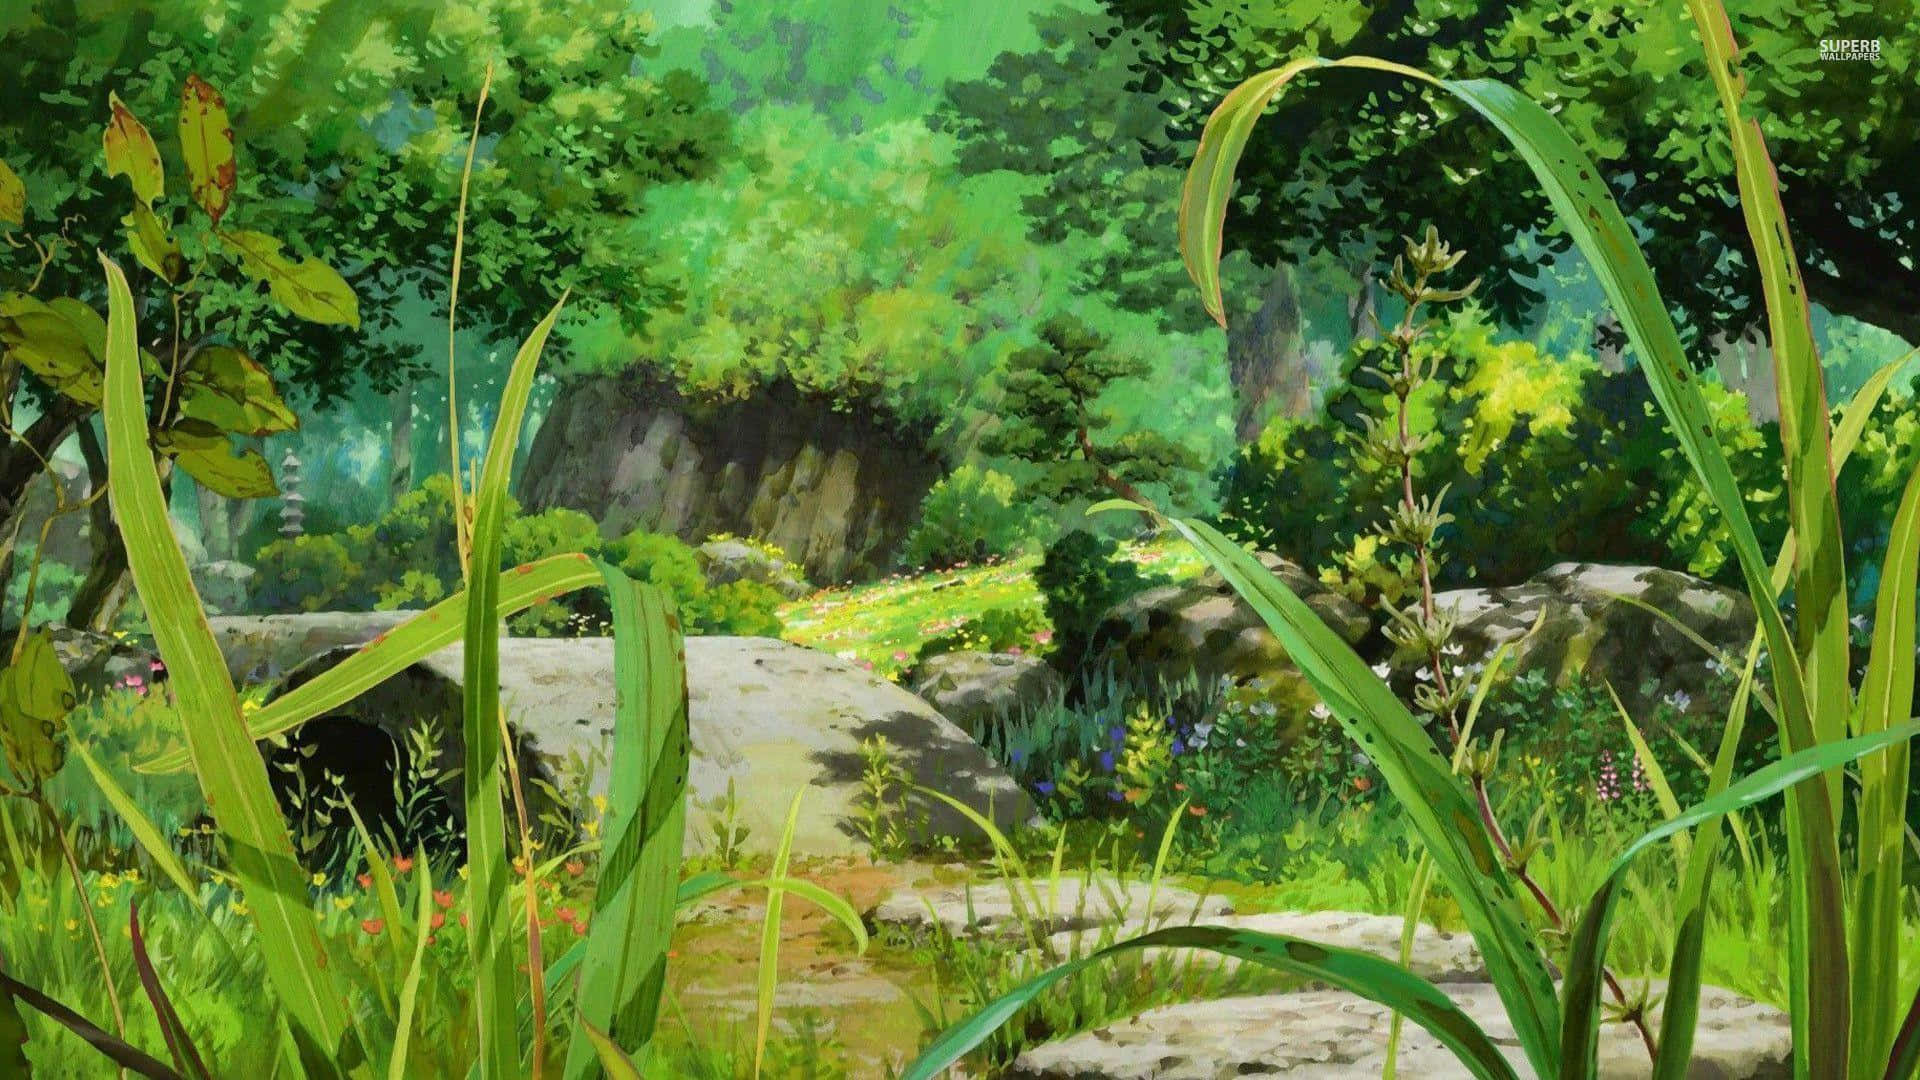 Get lost in a wondrous anime forest.